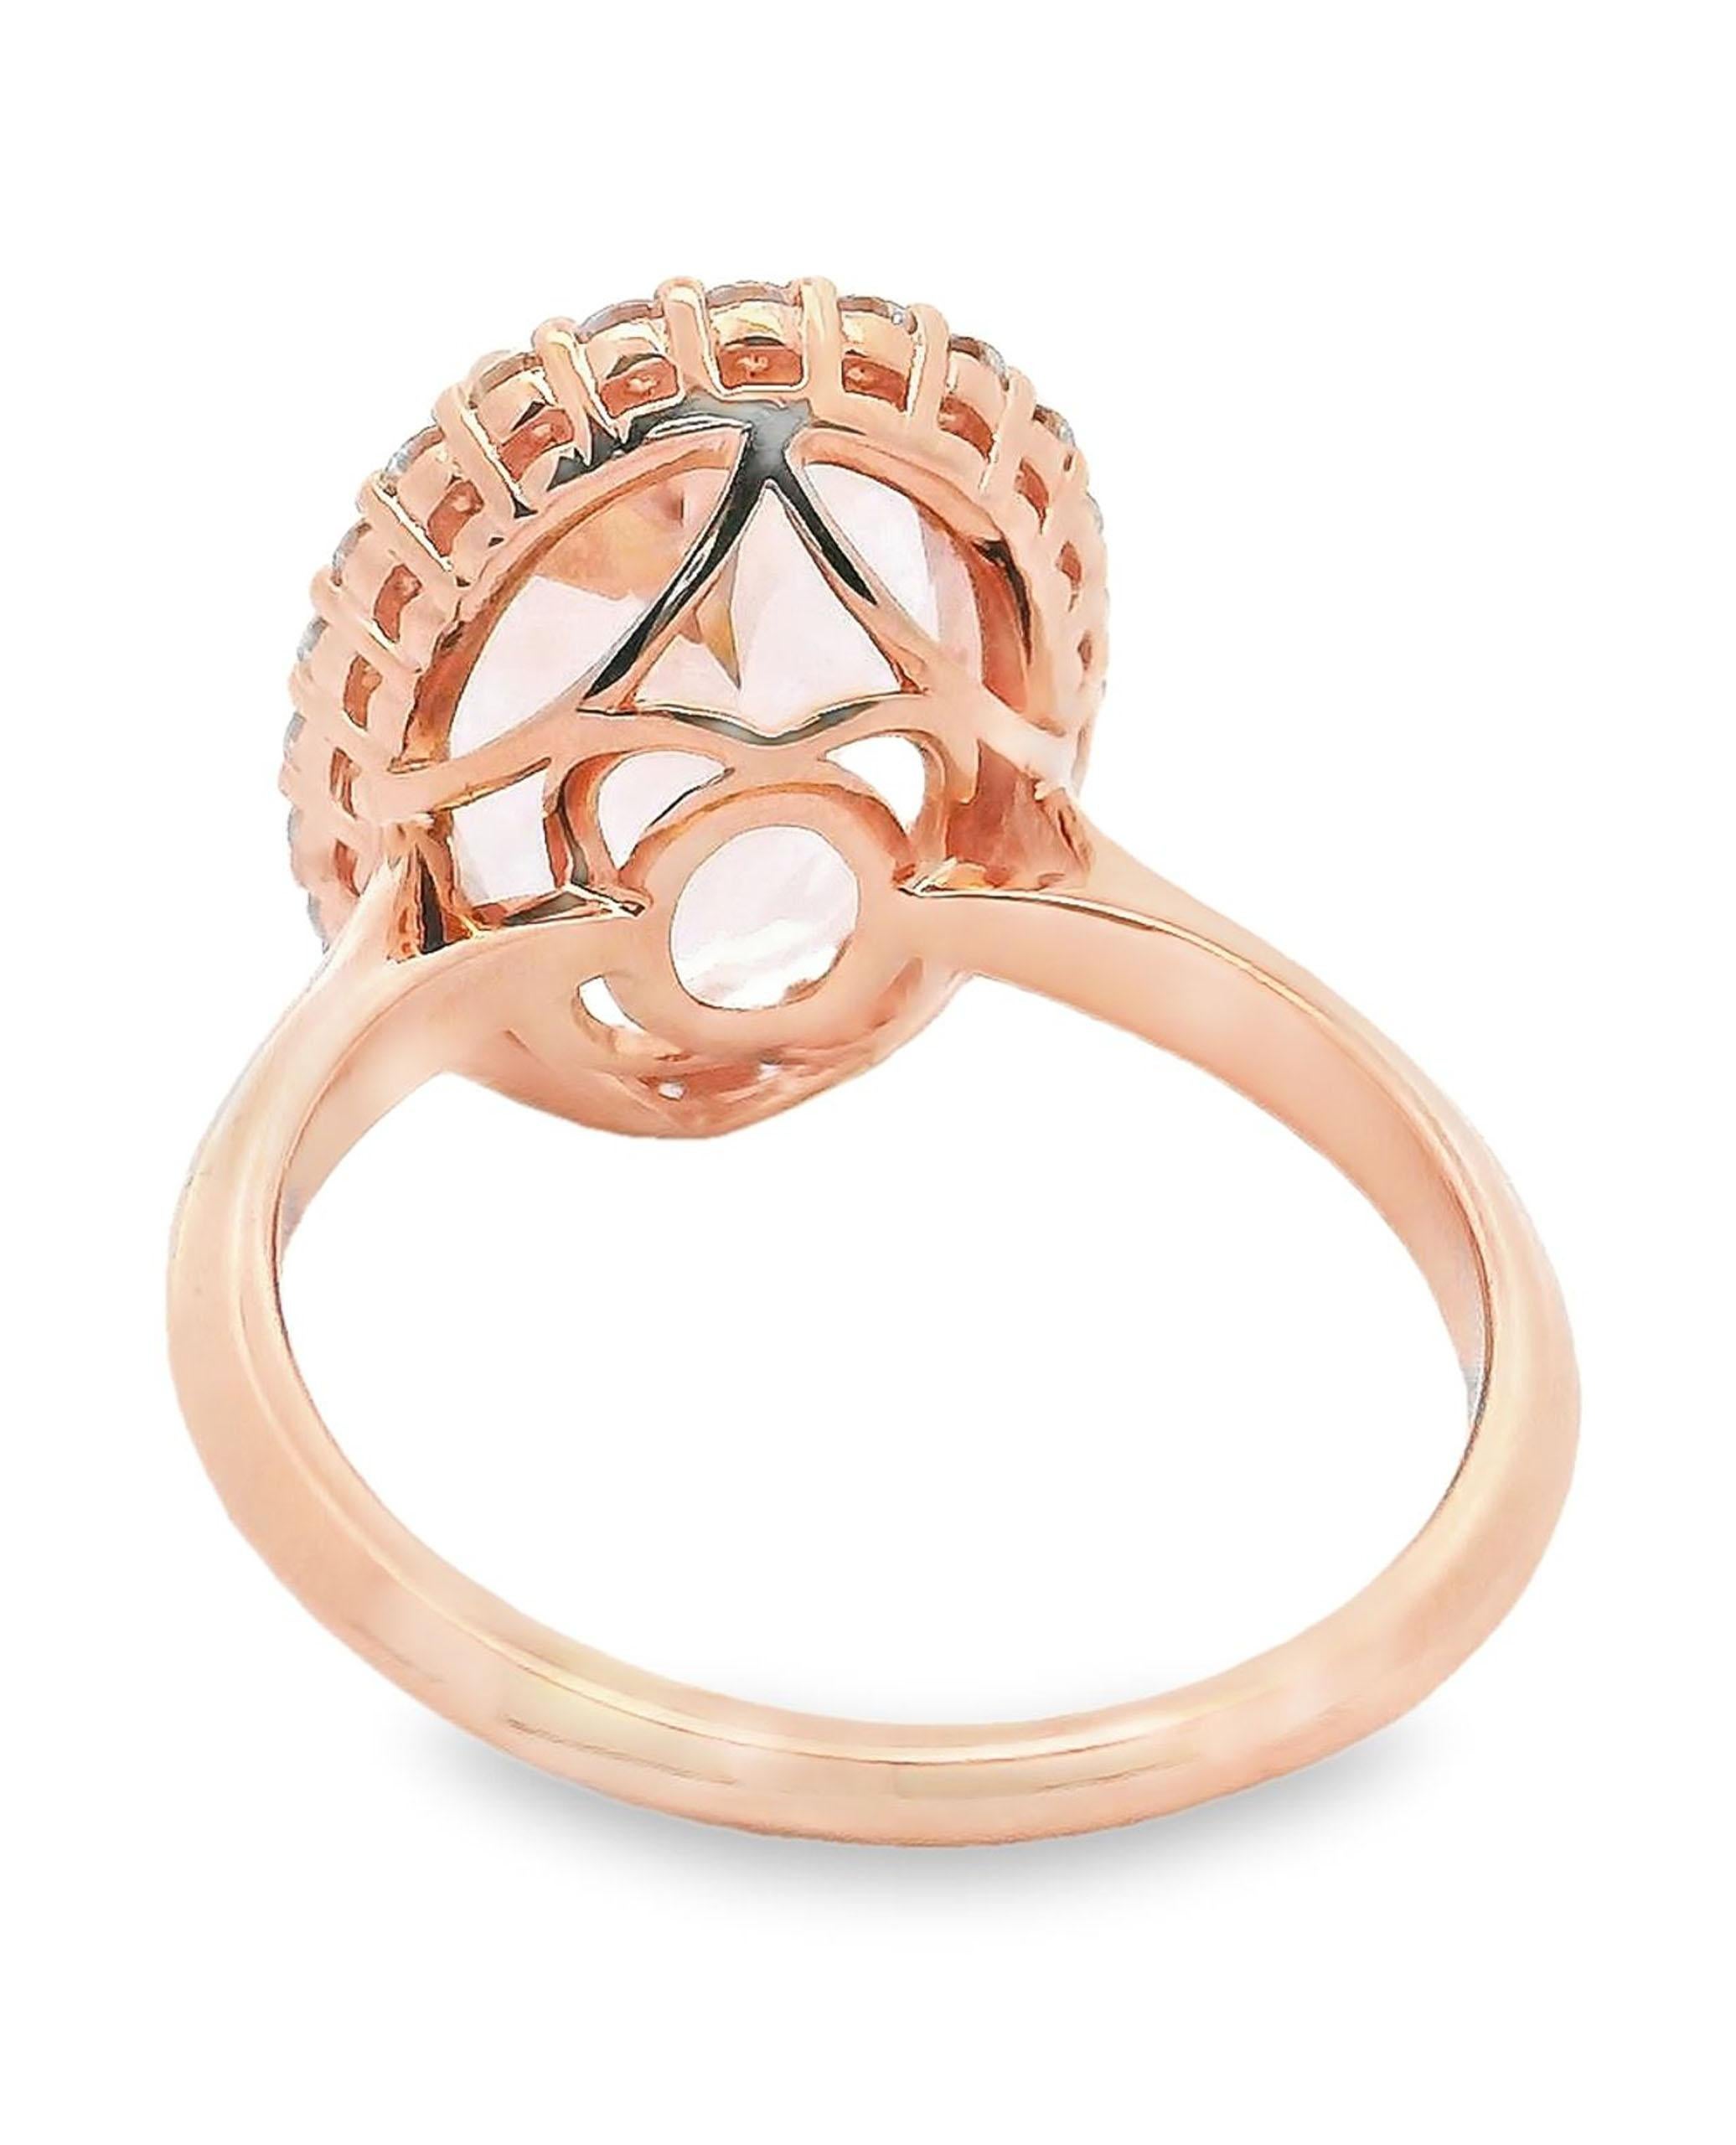 Contemporary 14K Rose Gold Halo Ring with Morganite and Diamonds For Sale